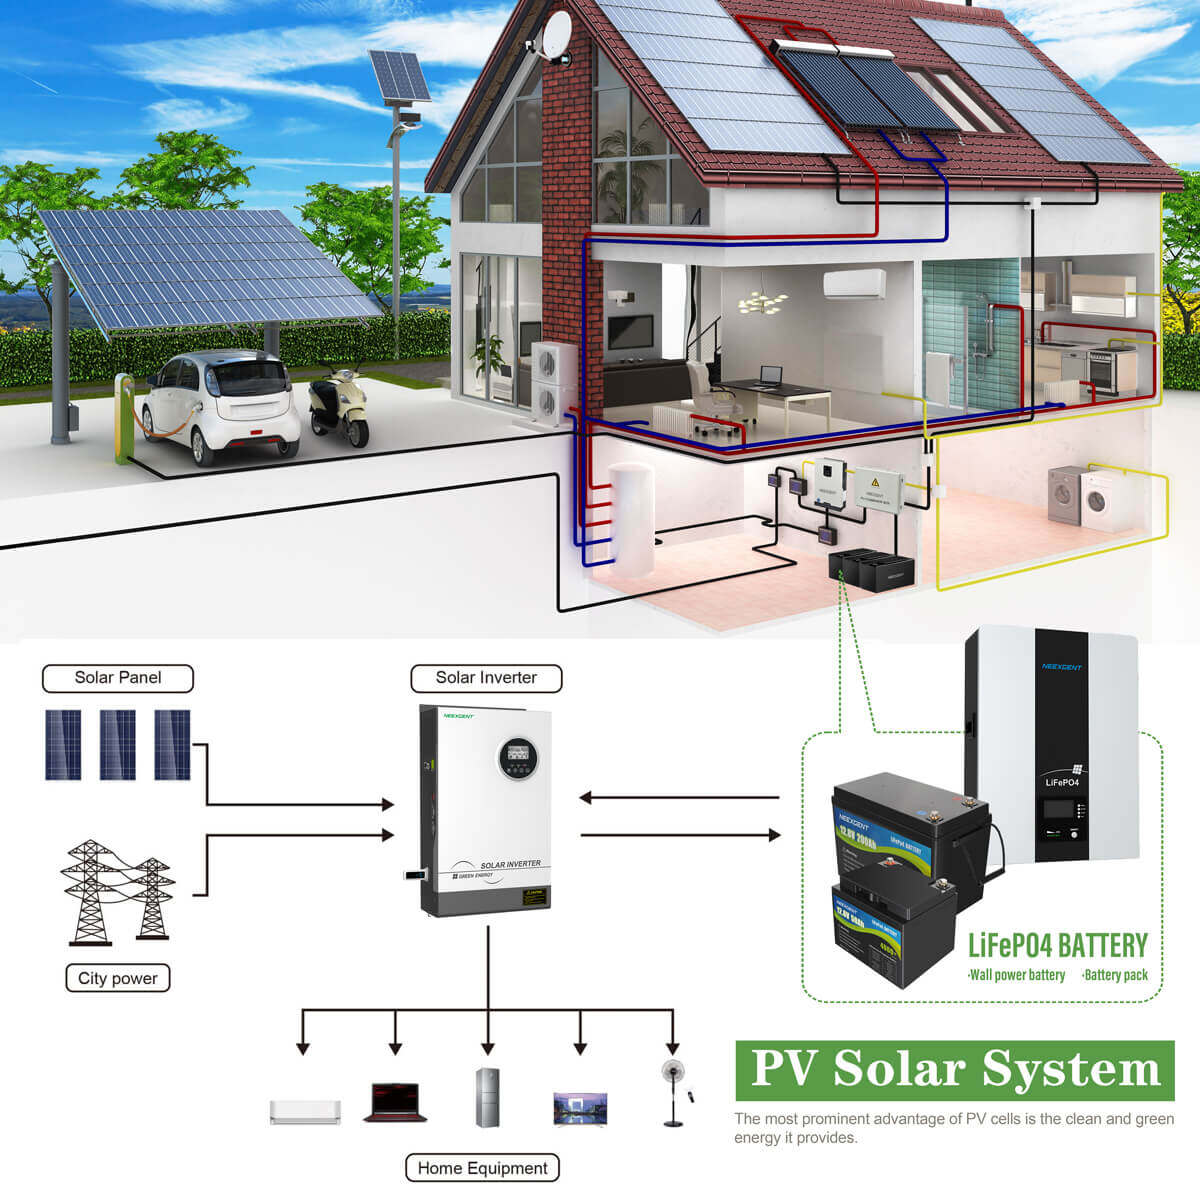 Selection of home solar systems